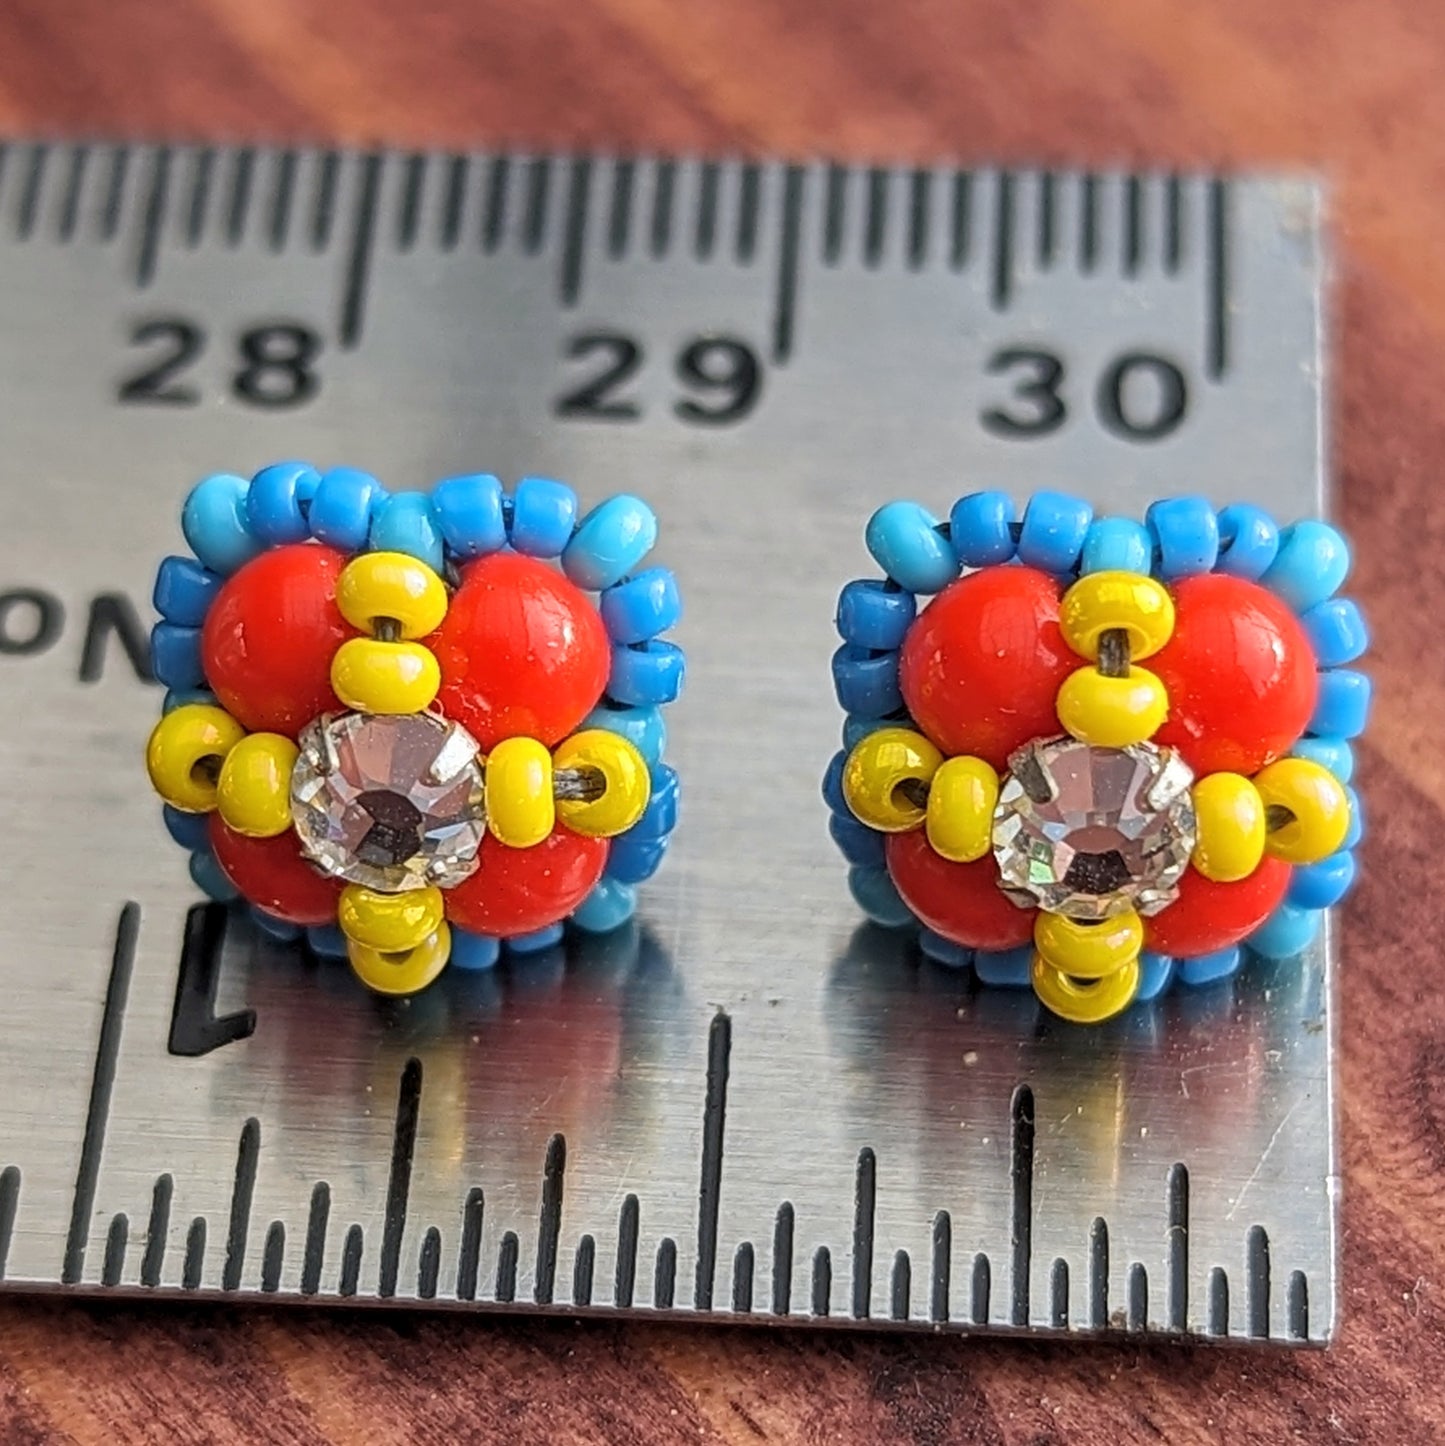 Square stud earrings formed from four red beads with a clear rhinestone held in place by an x-shape of yellow seed beads. The outside of the earrings is outlined in medium blue seed beads. The earrings are resting on a silver metal ruler showing they are about 3/8ths inch wide.